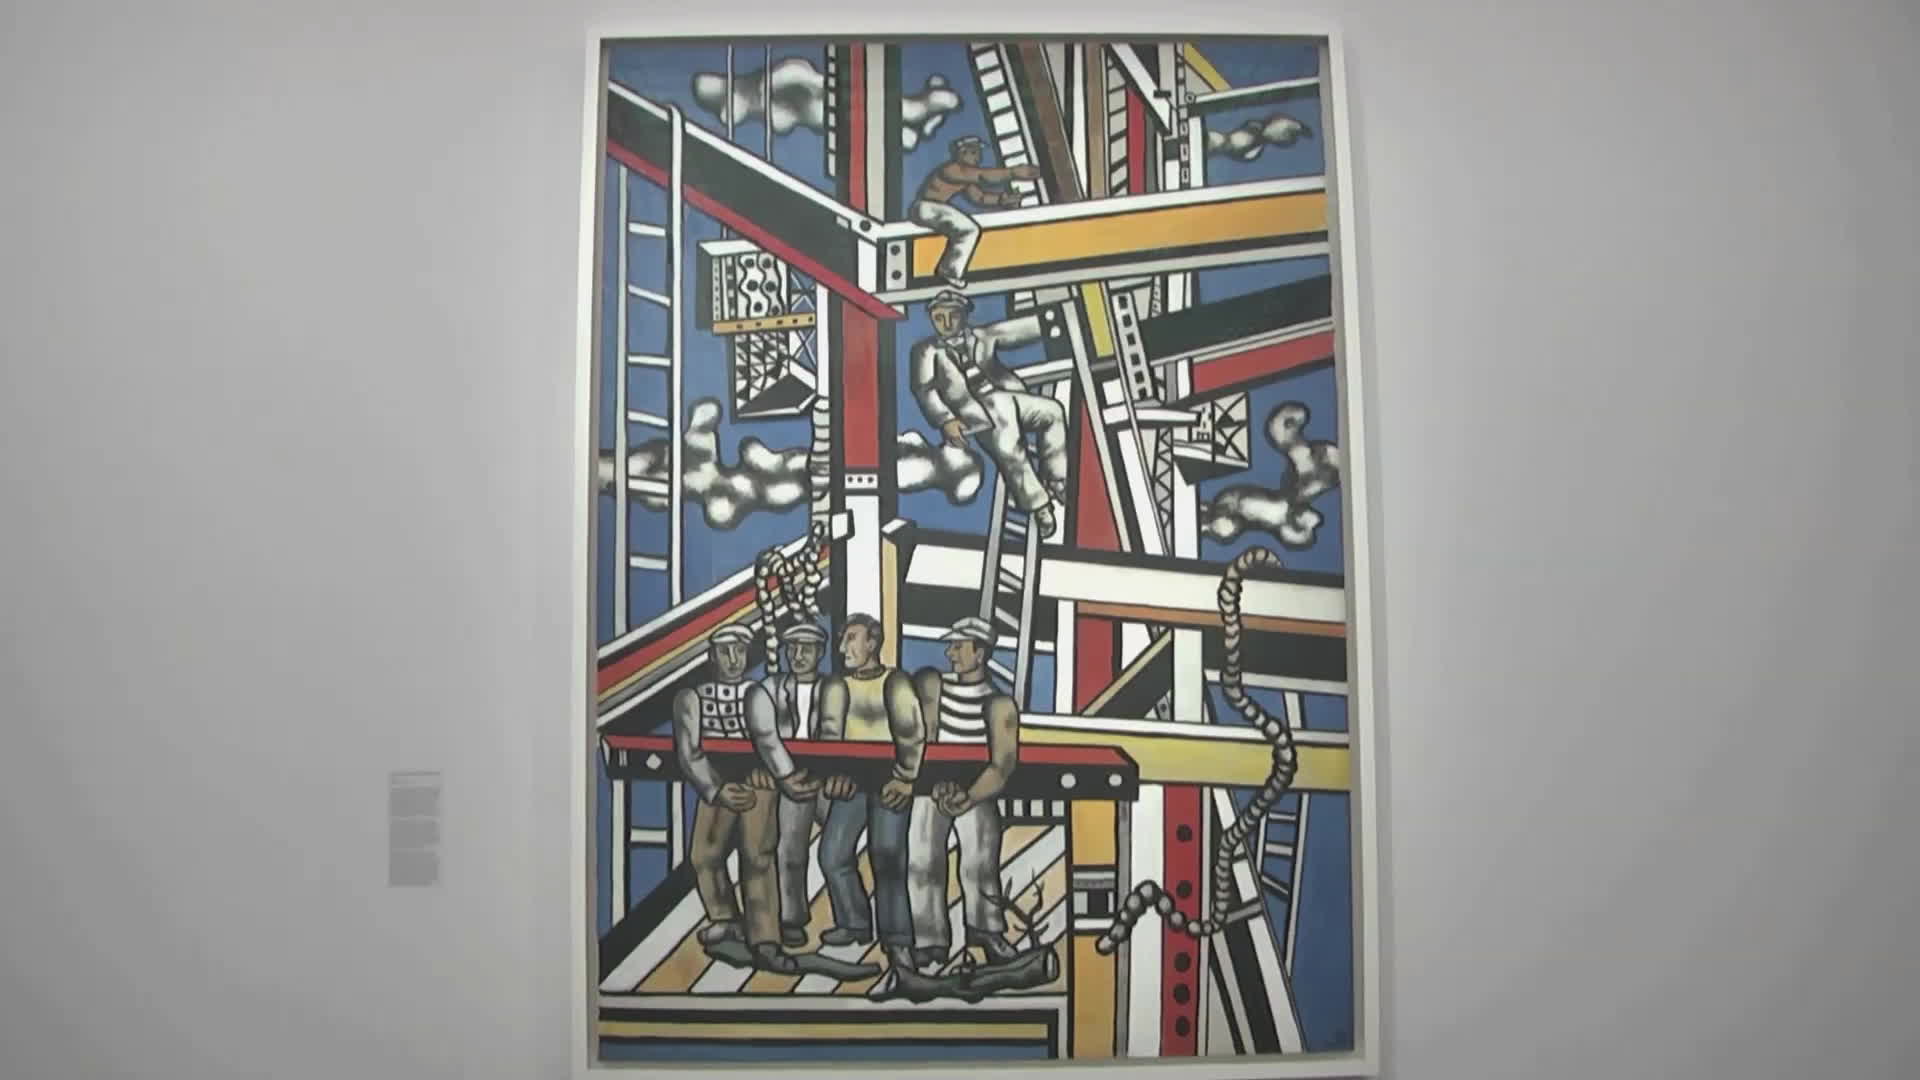 Fernand Léger, his political and artistic commitment